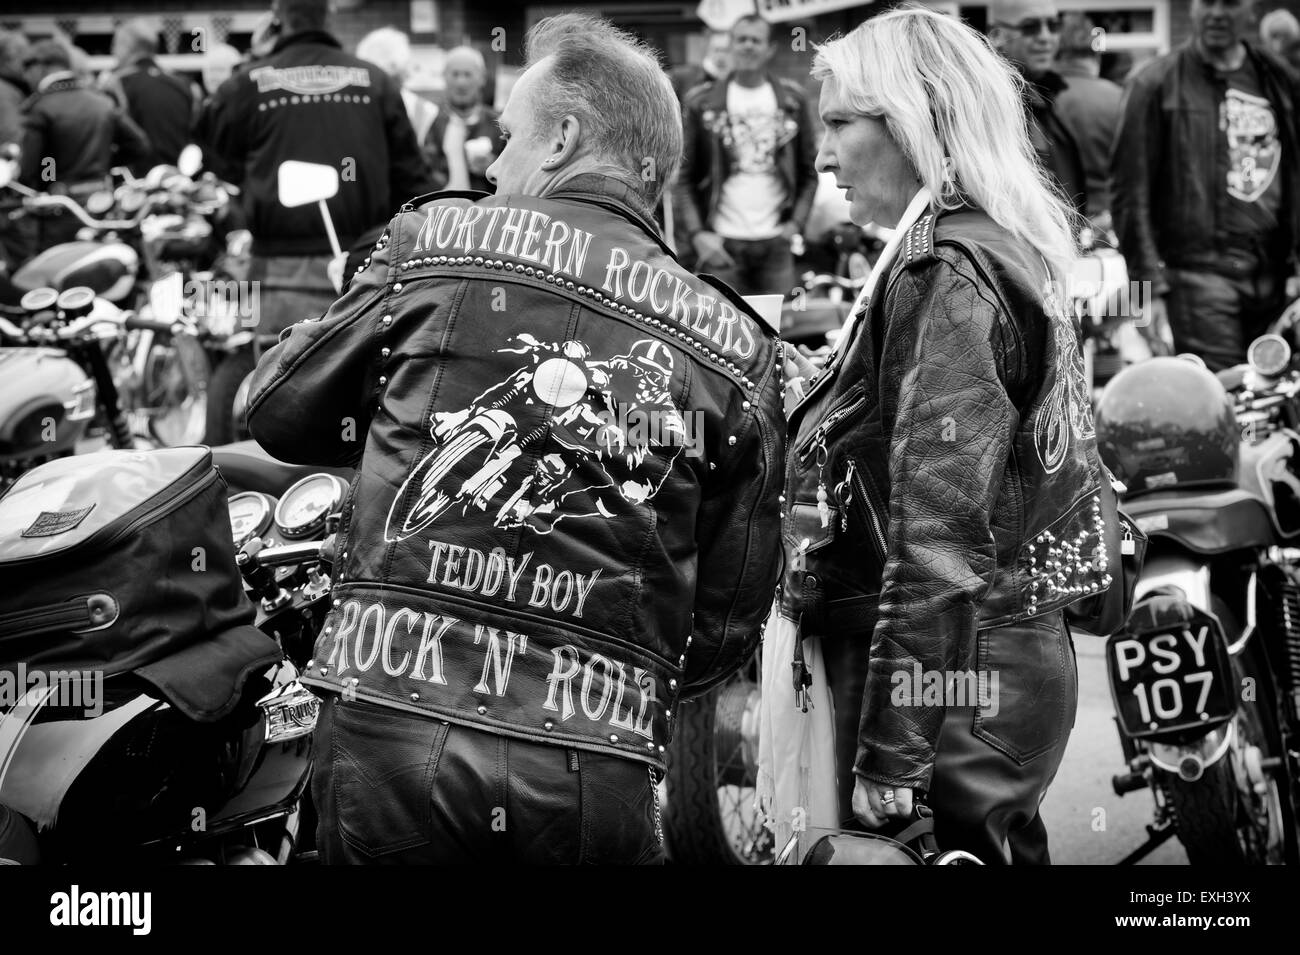 Rockers leather jacket covered in studs, patches and badges. Ton up Day, Jacks Hill Cafe, Northamptonshire, England. Monochrome Stock Photo